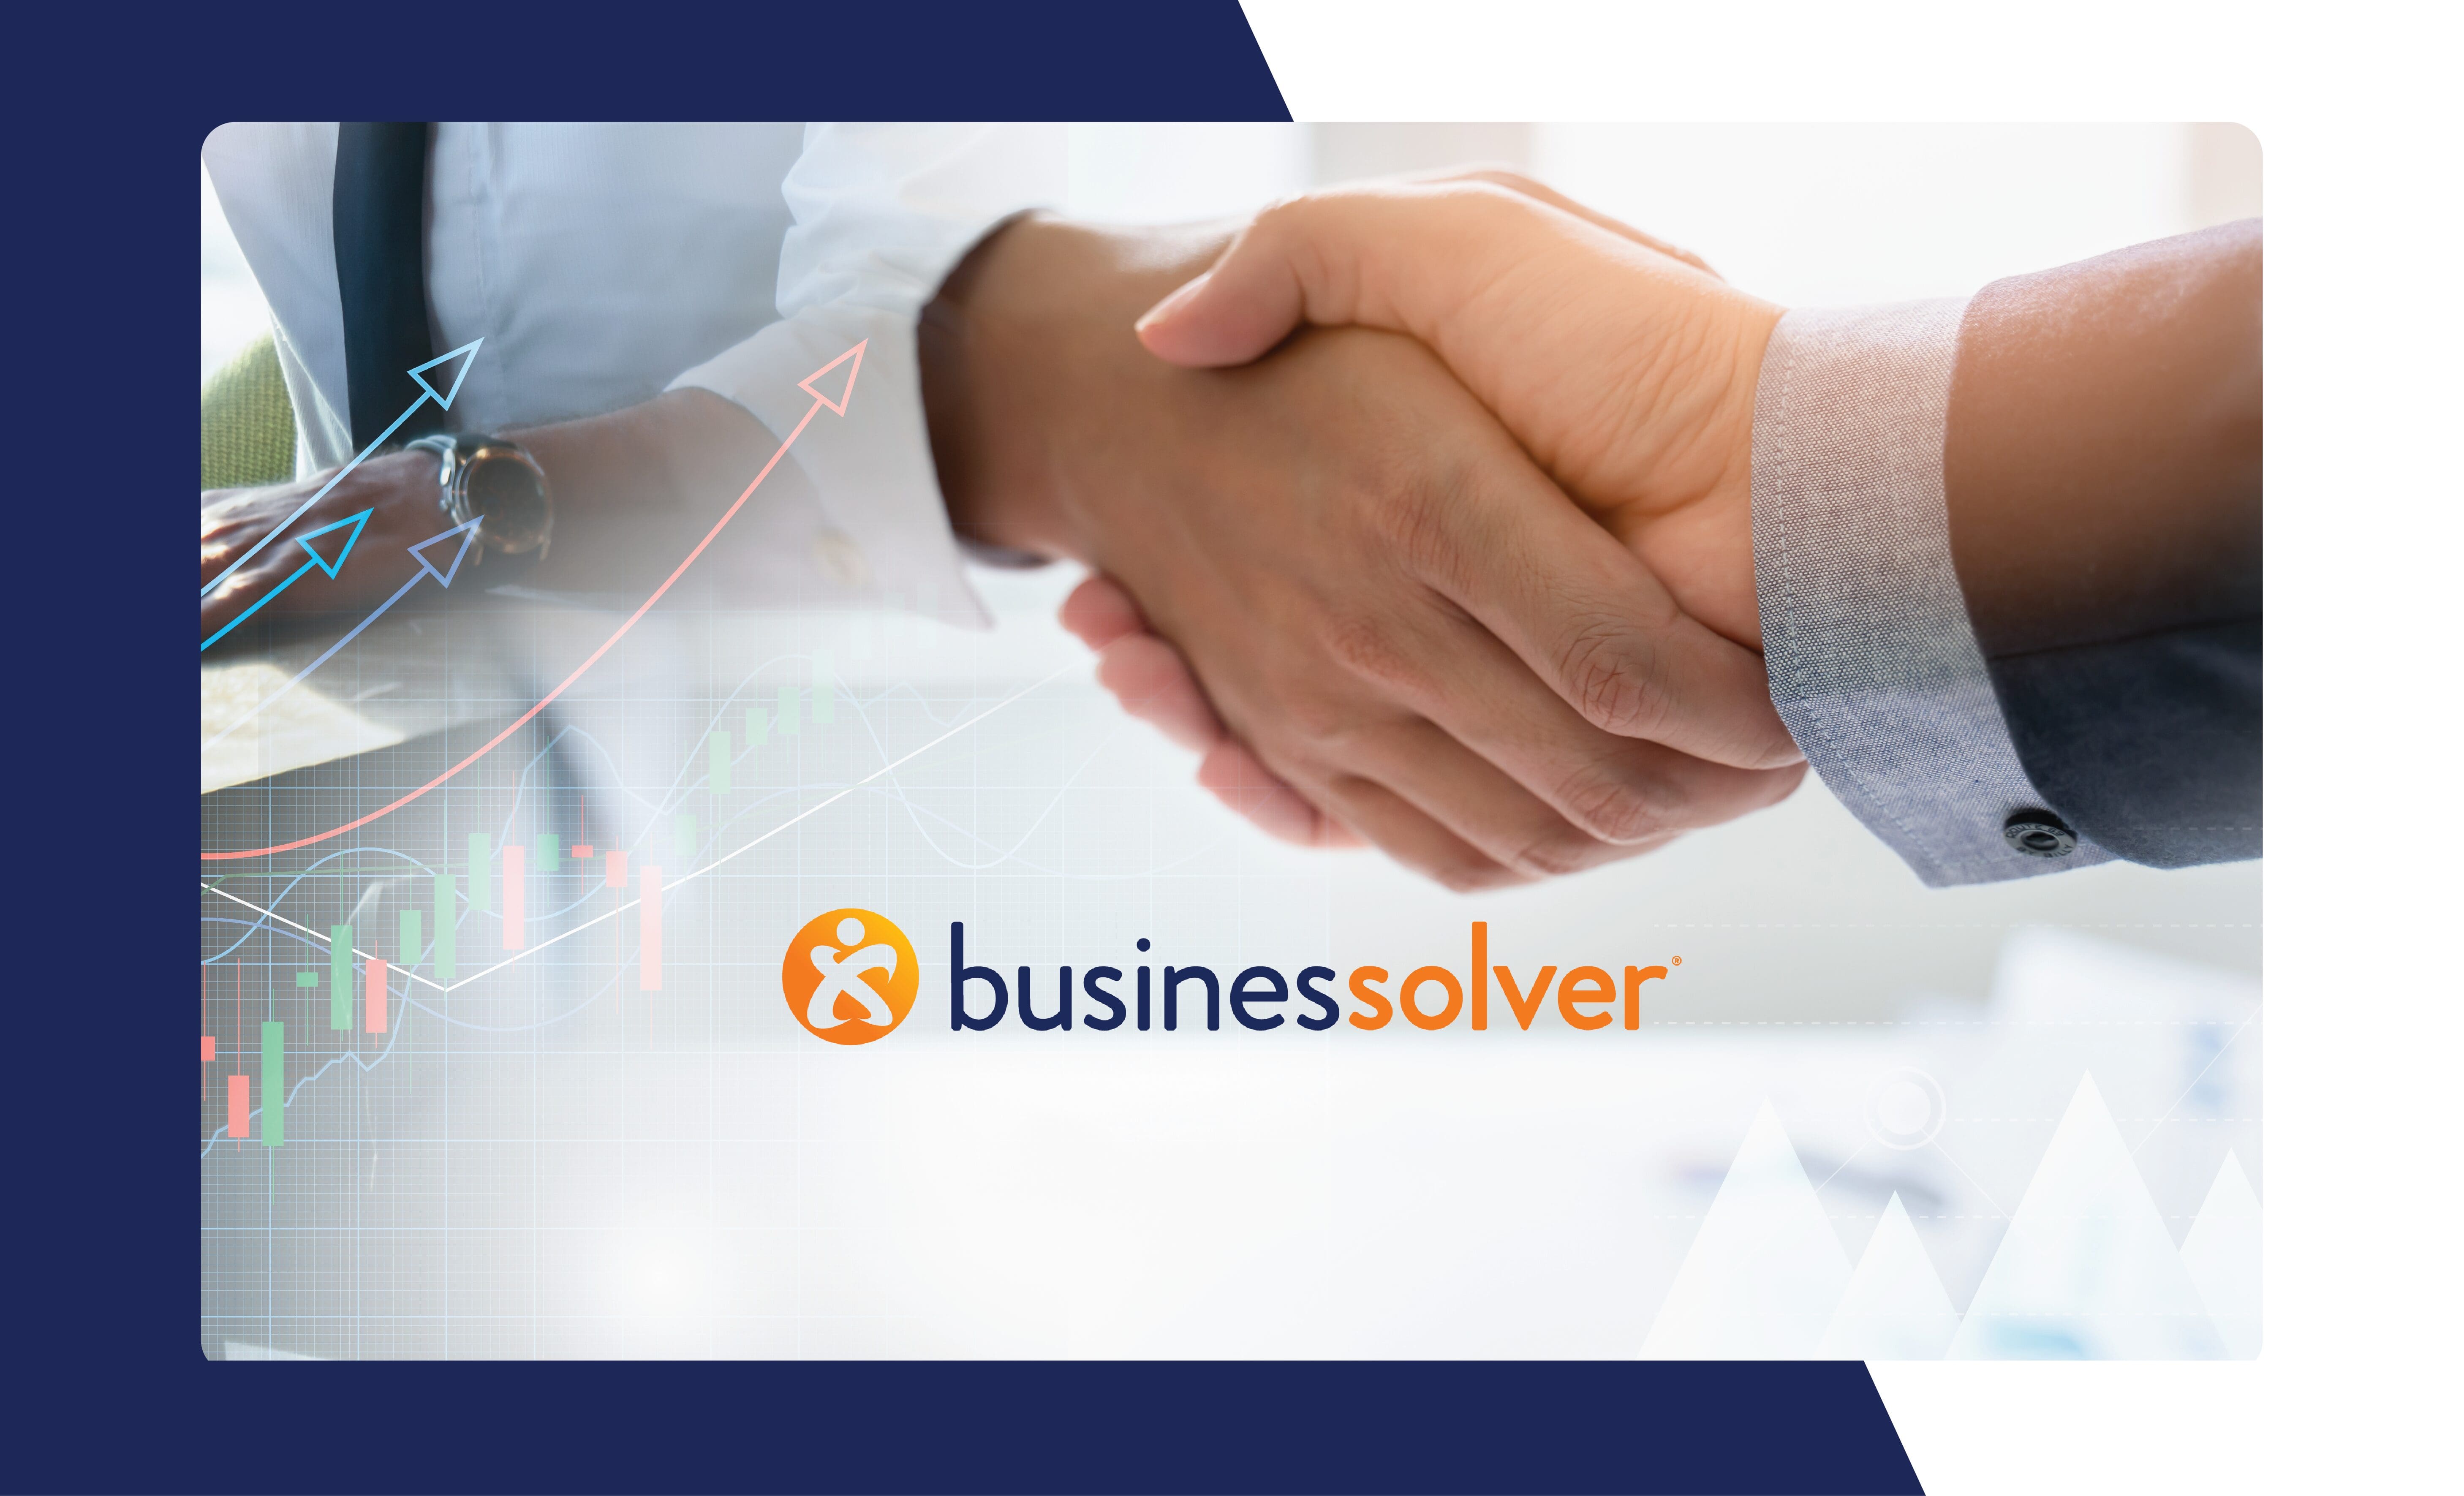 Businessolver acquisition of Capstone handshake welcome to the family